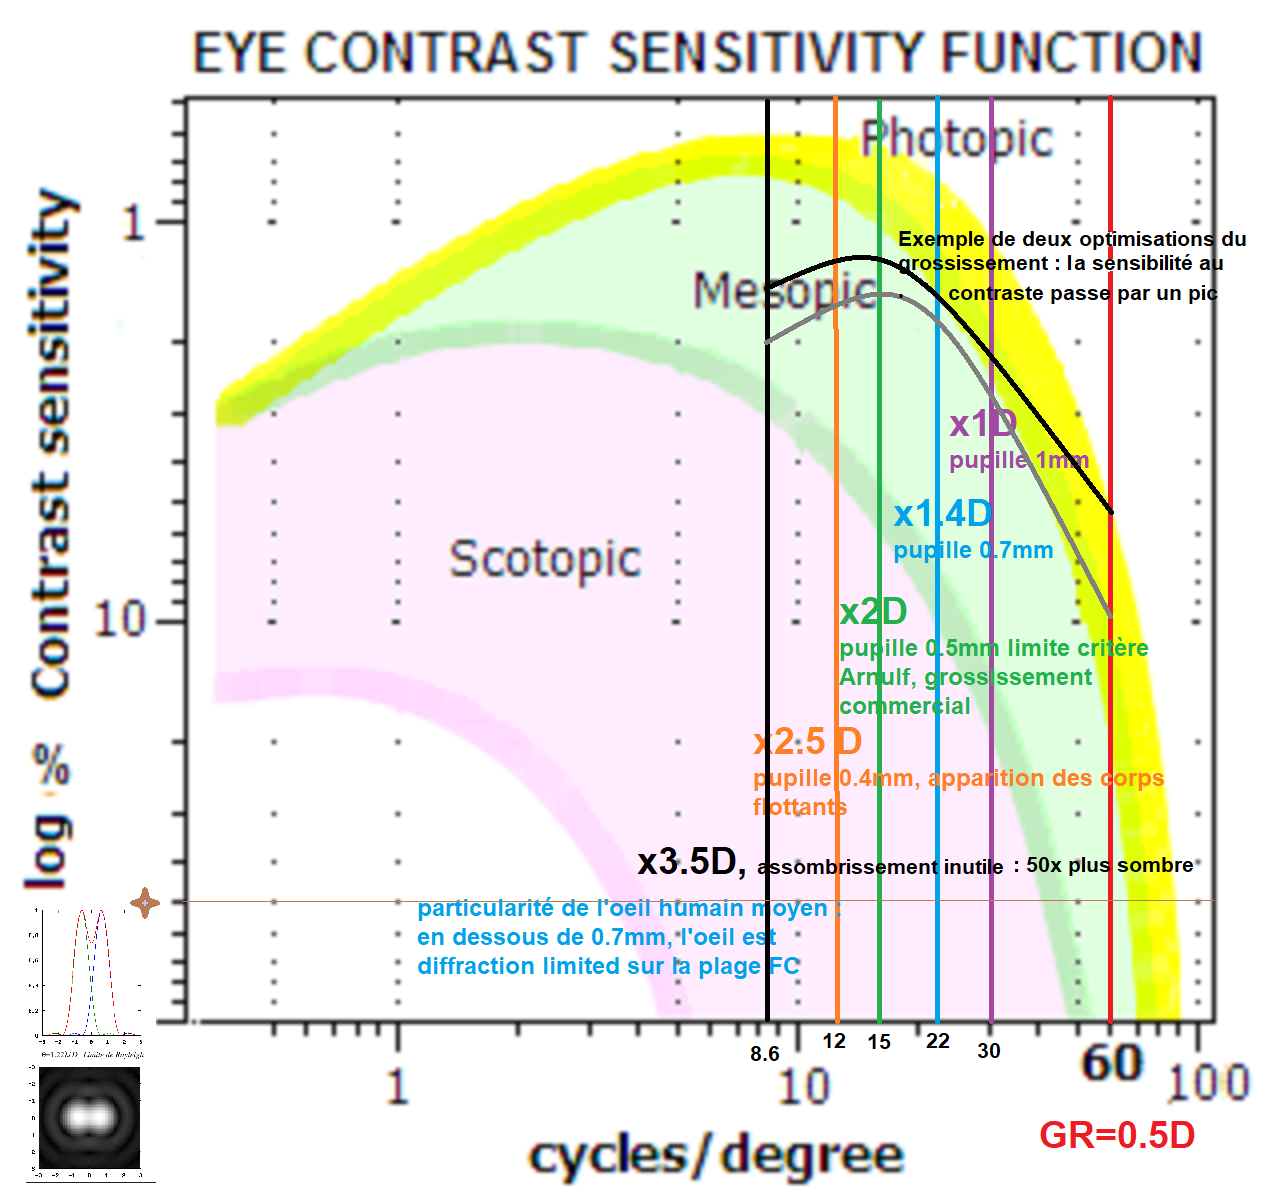 eye_contrast0.png.34768062e15dd26a7a1370fdcb30d60c.png